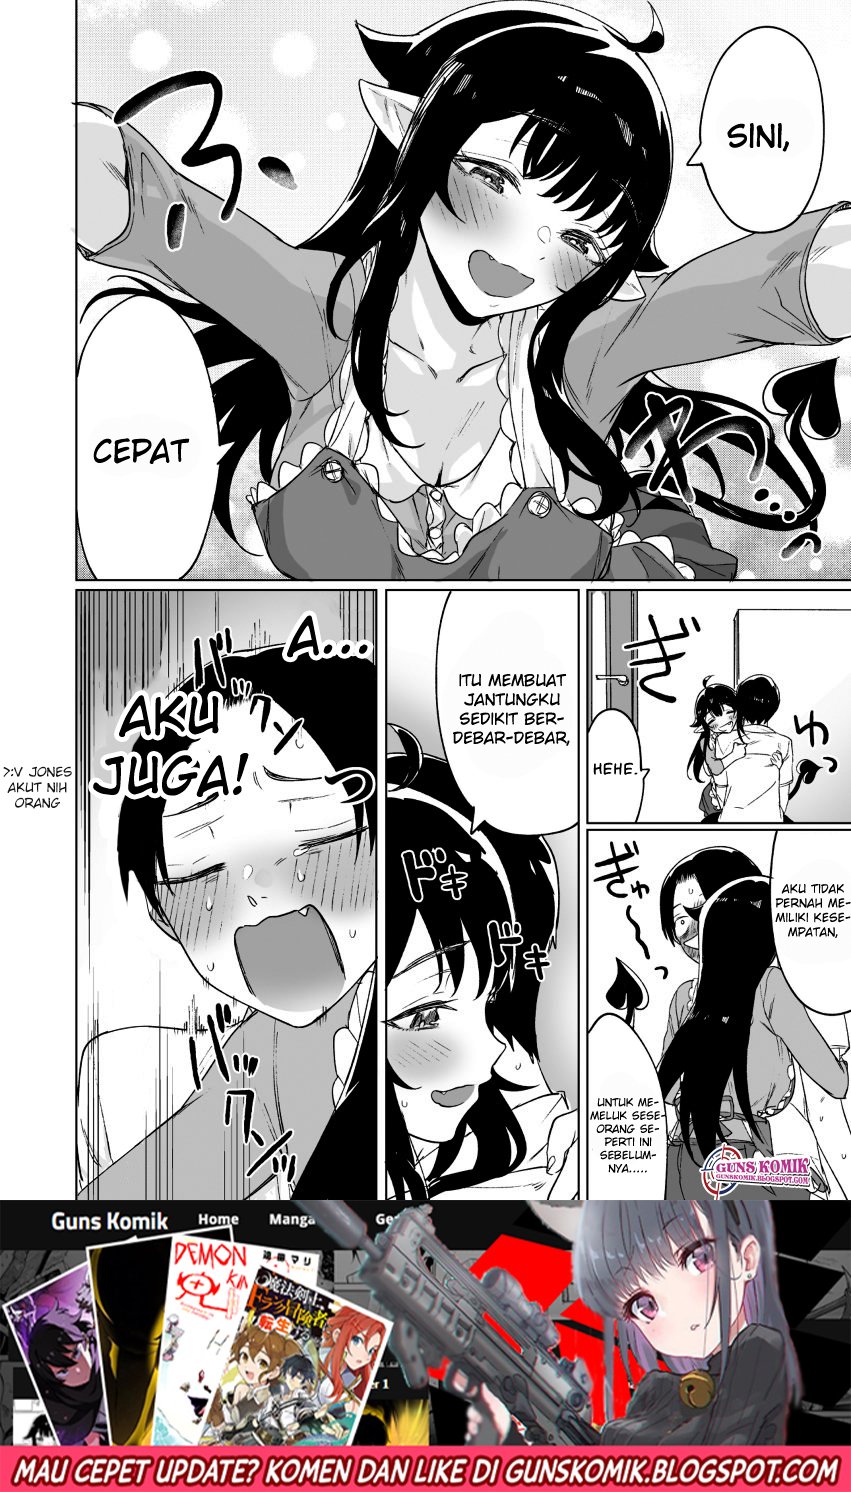 Baca I Brought Home a Succubus who Failed to Find a Job Chapter 3  - GudangKomik